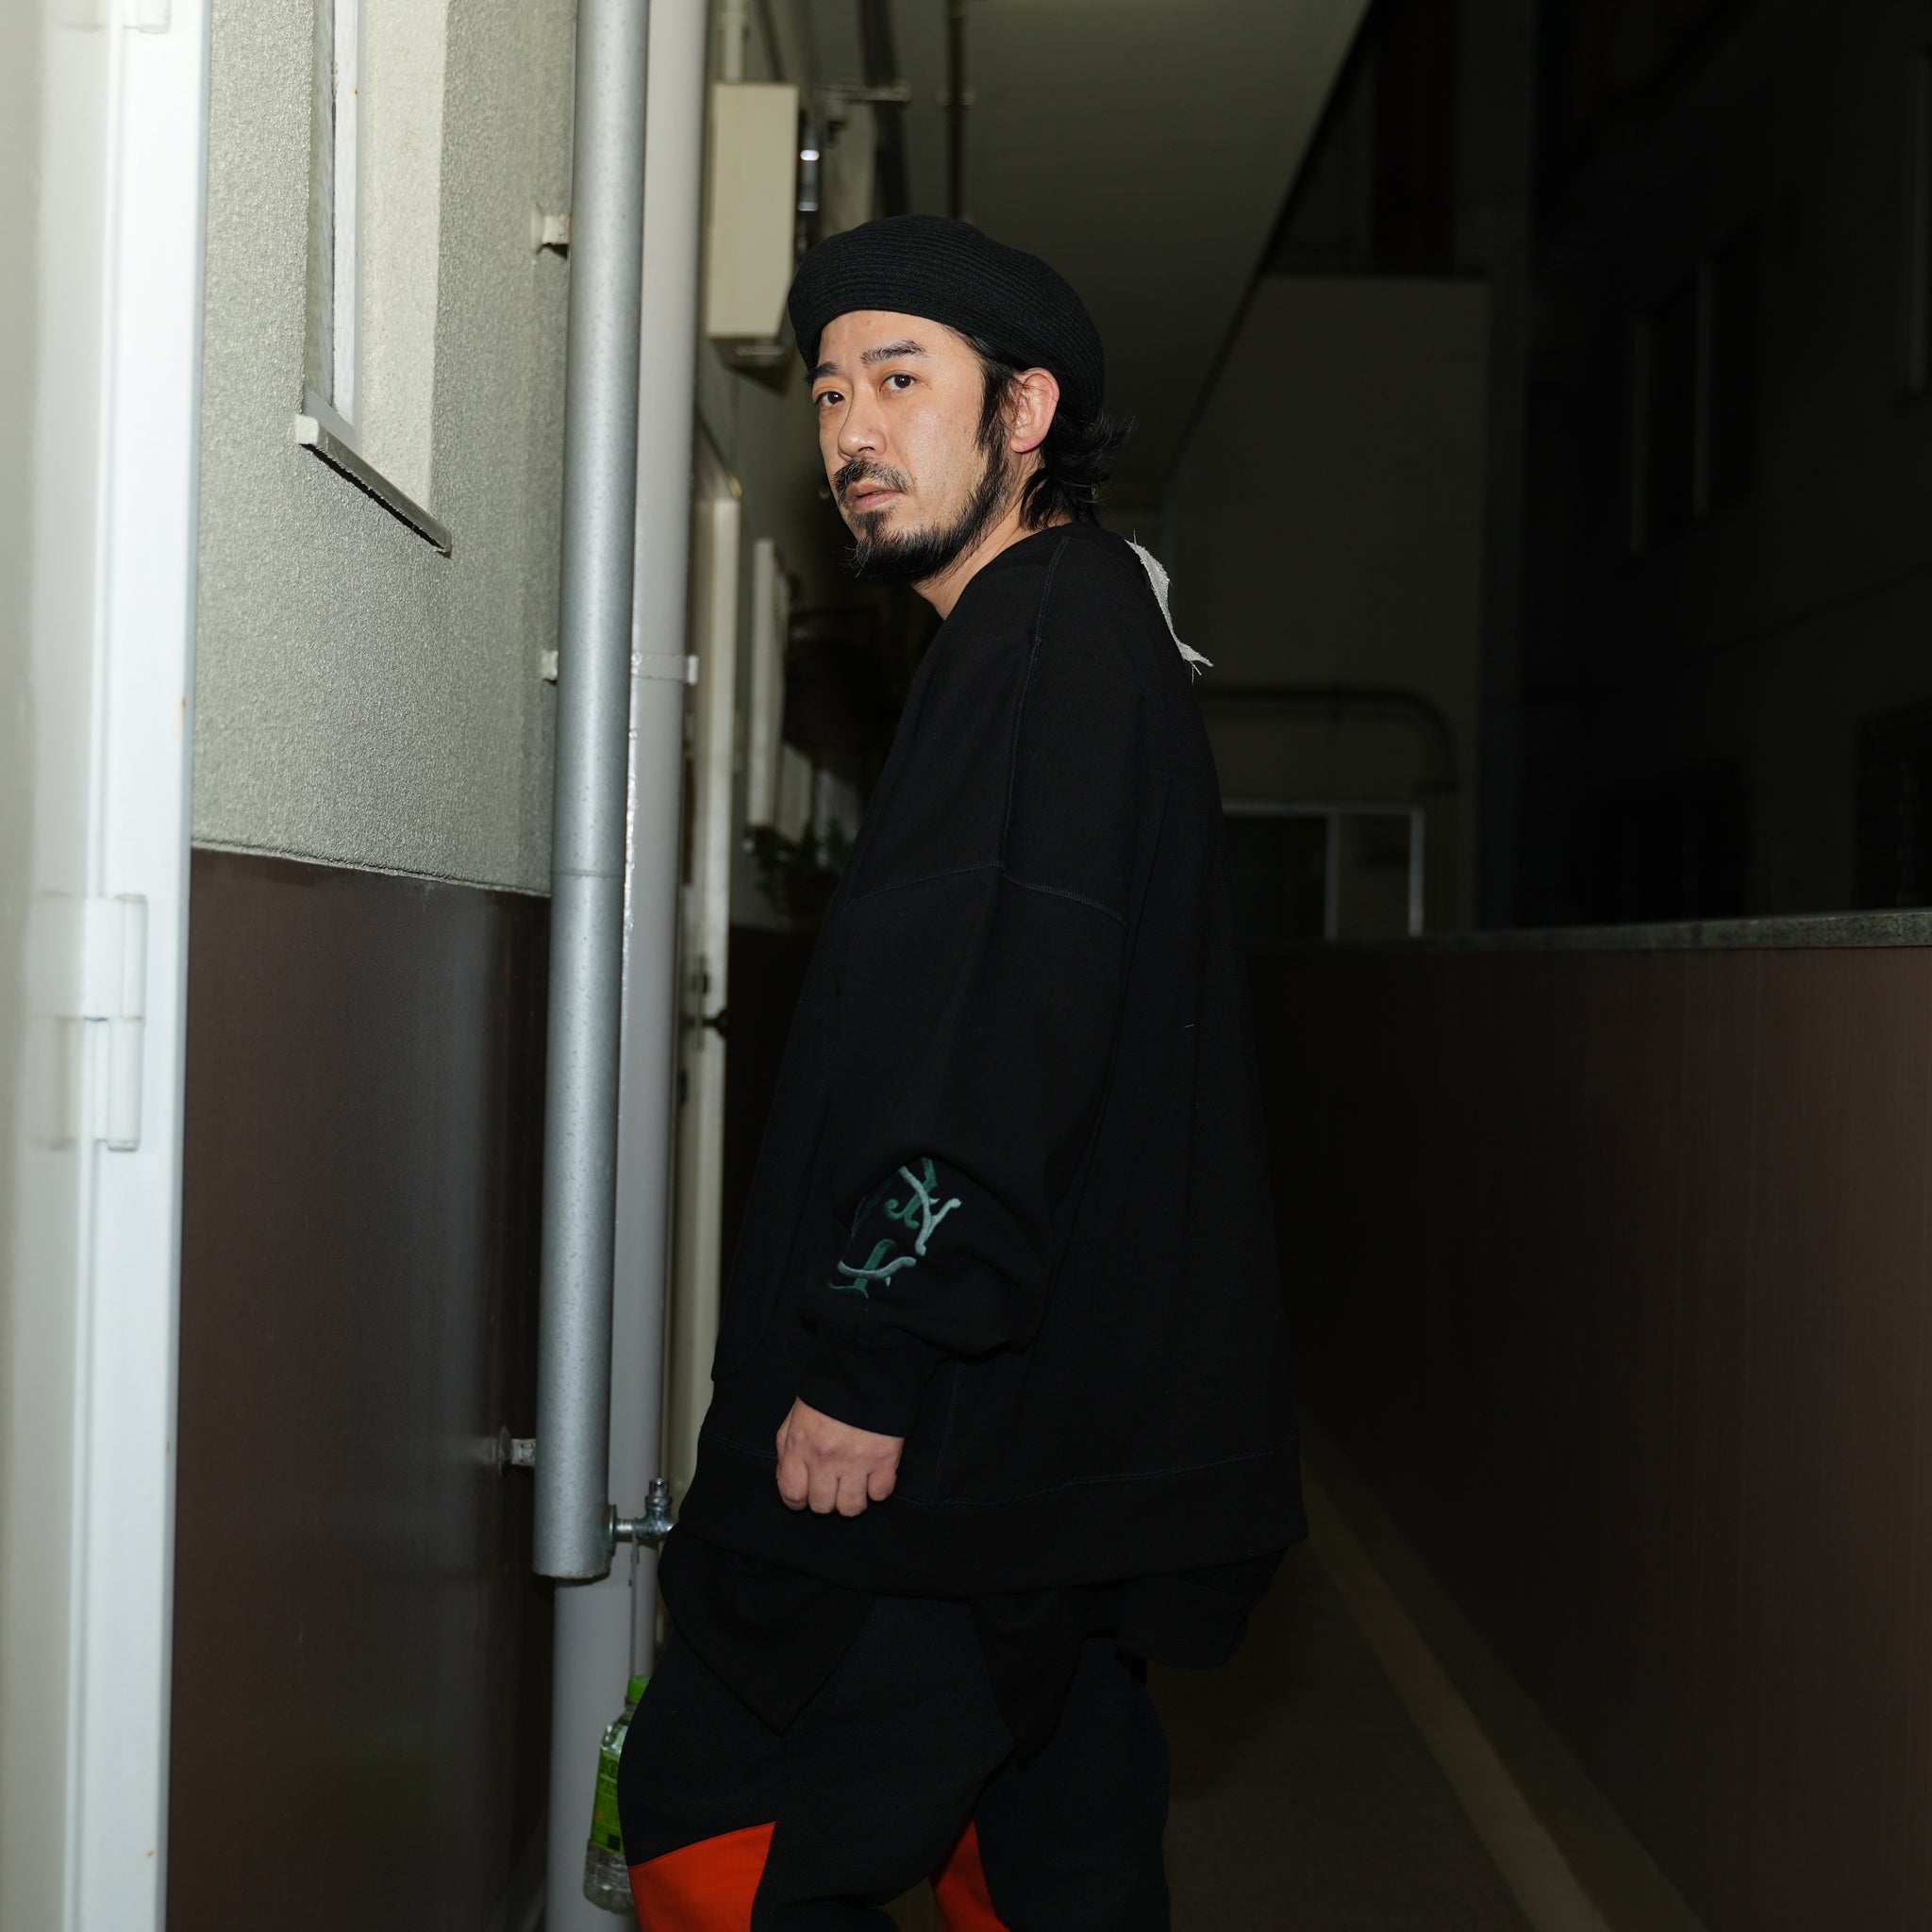 No:ACRS22-T01 | Name:MANDRAGORA HOODIE	 | Color:Black | Size:Free【(A)CRYPSIS®】【SEIVSON_セイヴソン】